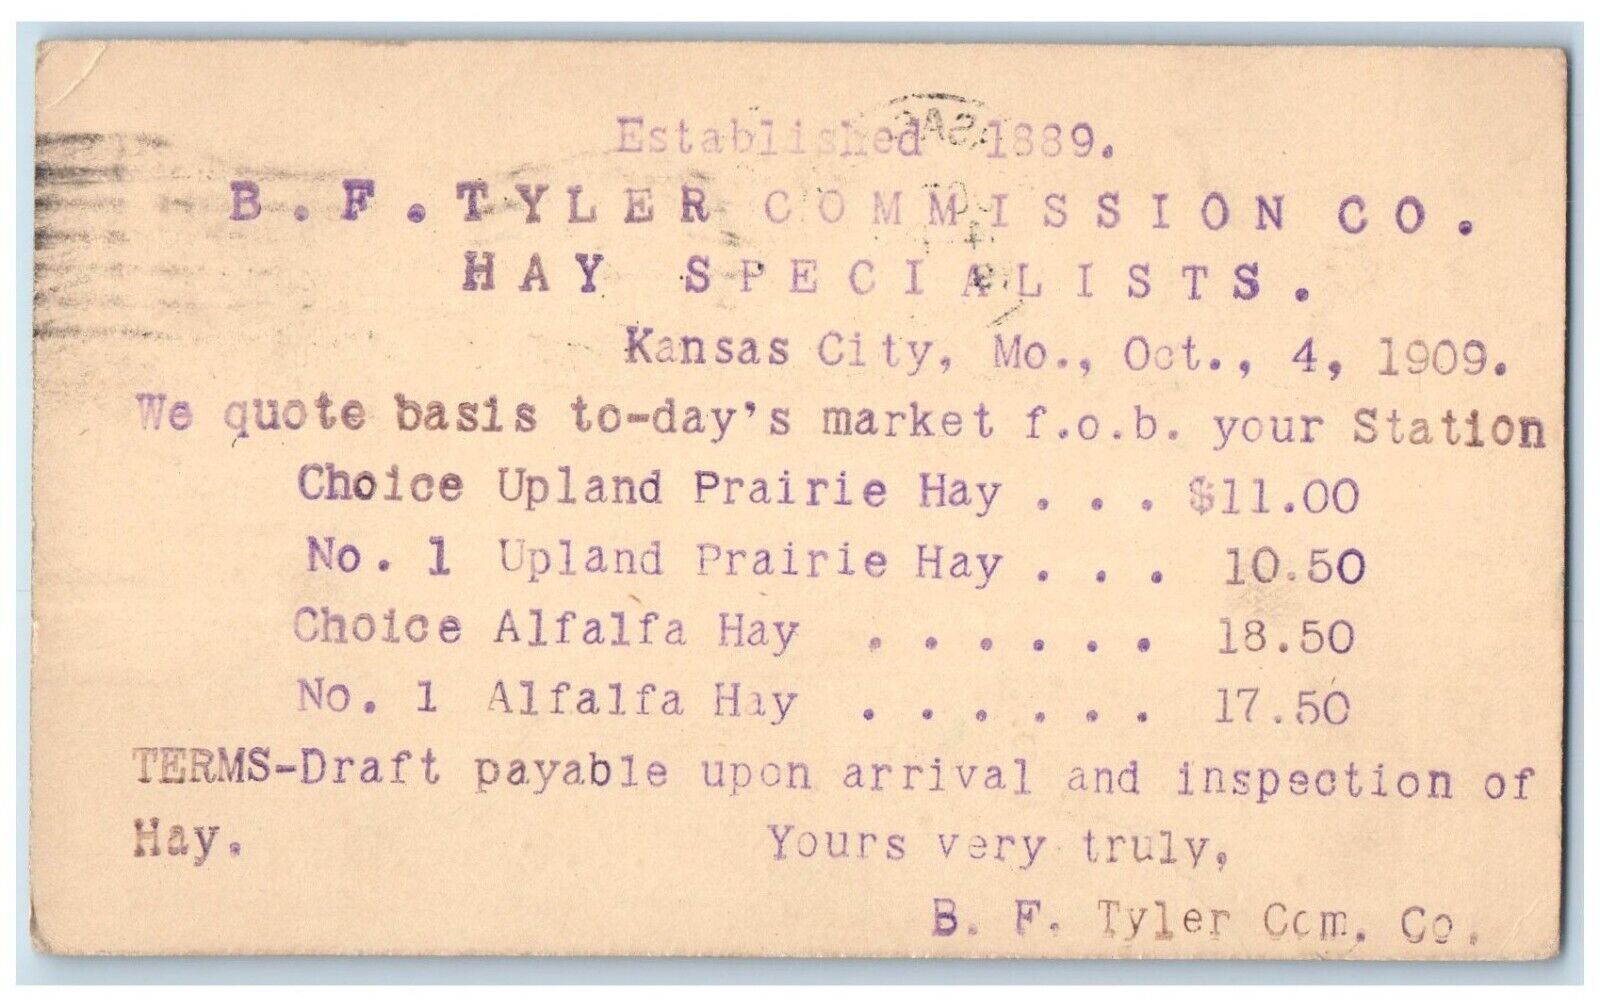 1909 B.F. Tyler Commission Co. Hay Specialists Kansas City MO Postal Card